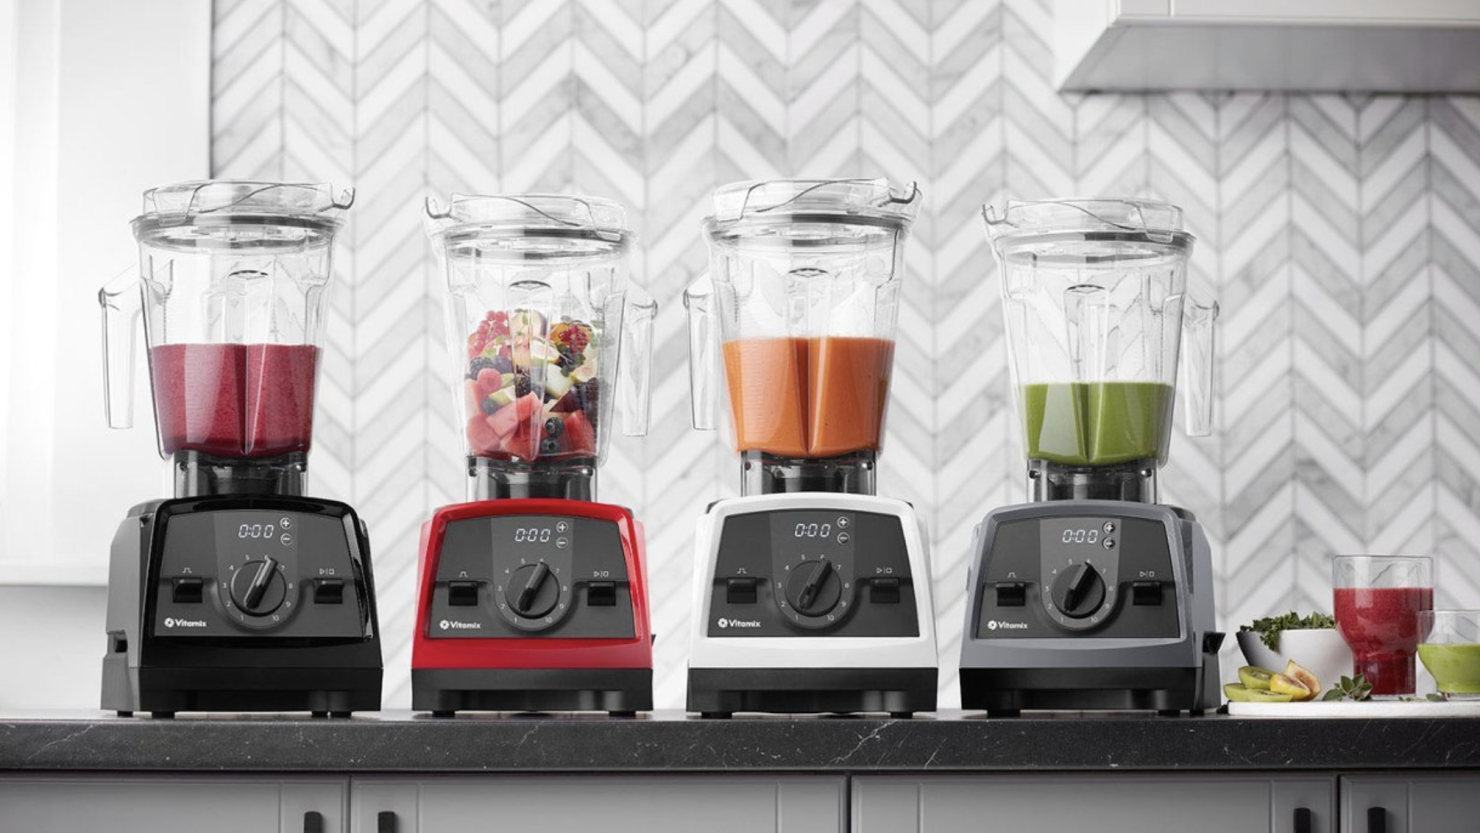 The Best Vitamix Deals Right Now